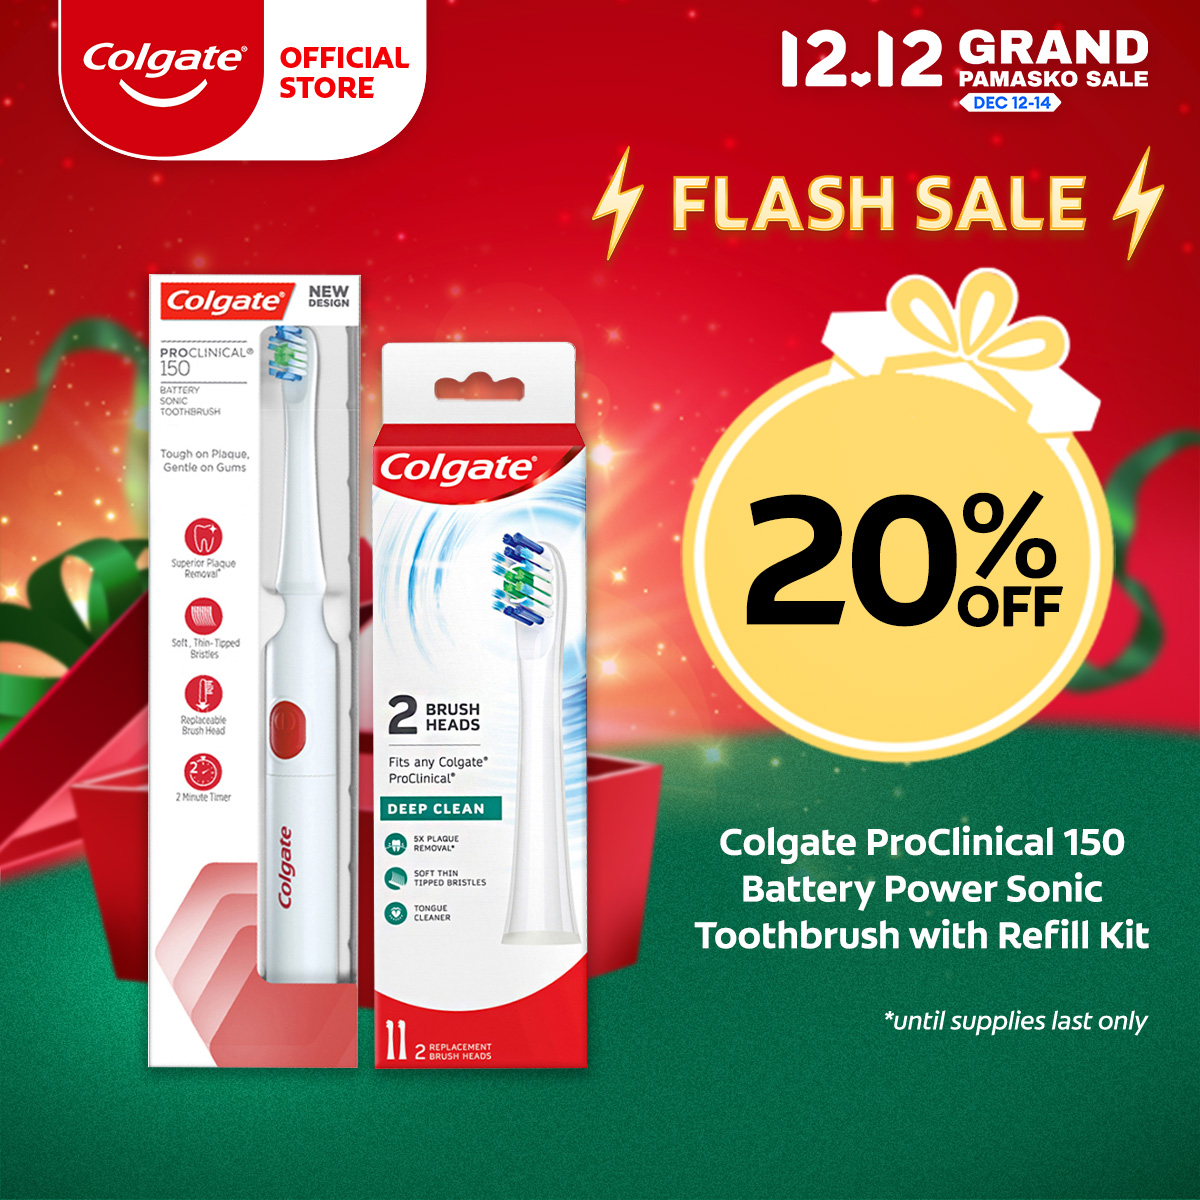 Lazada Philippines - Colgate ProClinical 150 Battery Power Sonic Toothbrush with Soft Bristles with Refill Kit